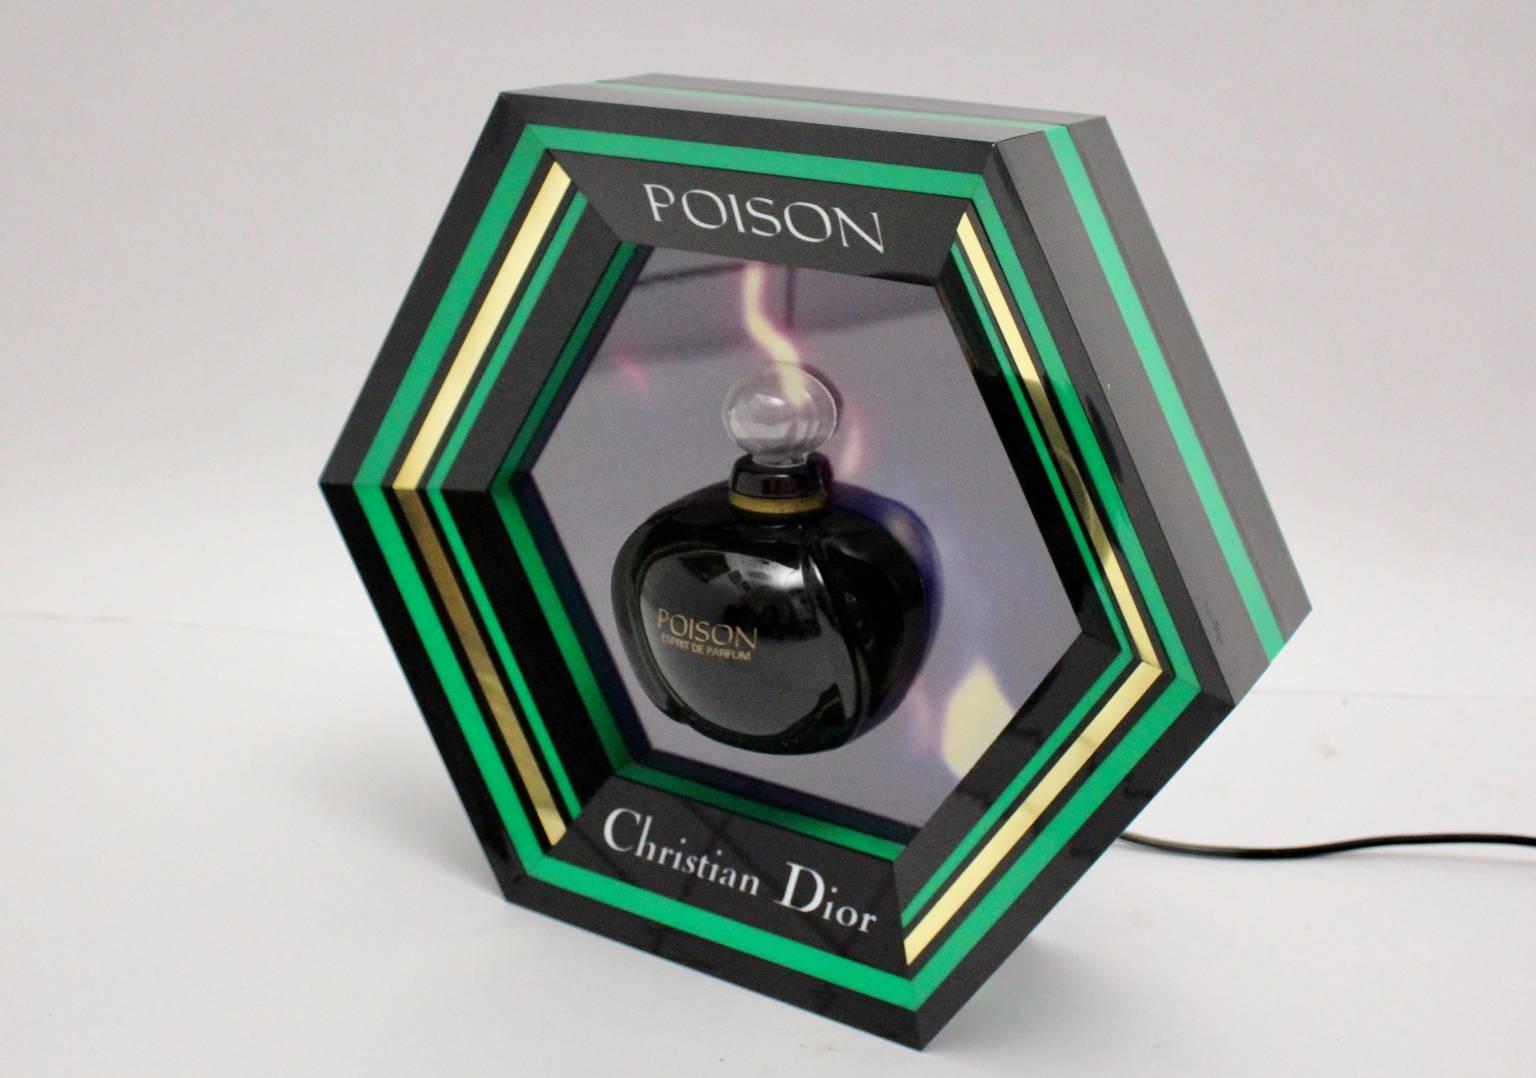 Multicolored Billboard Light for Poison Parfum by Christian Dior, 1985 1